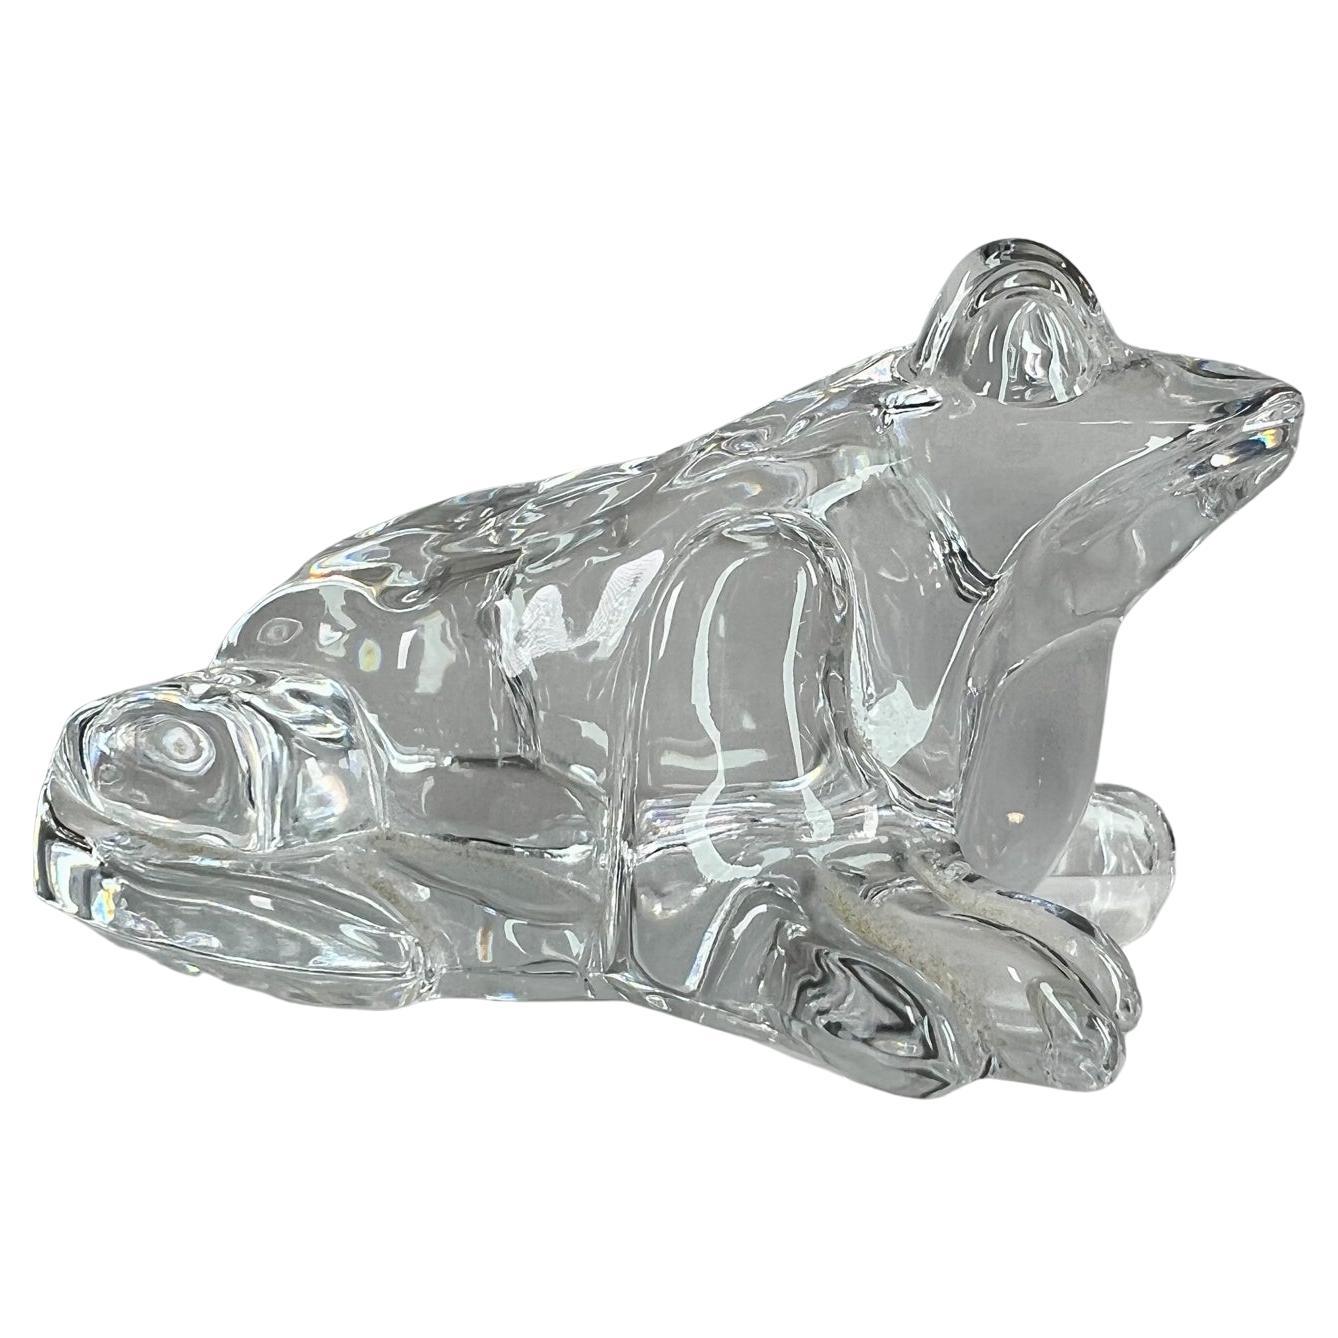 1980s Lovely Frog Paperweight Sculptural Glass Figurine by Waterford Crystal